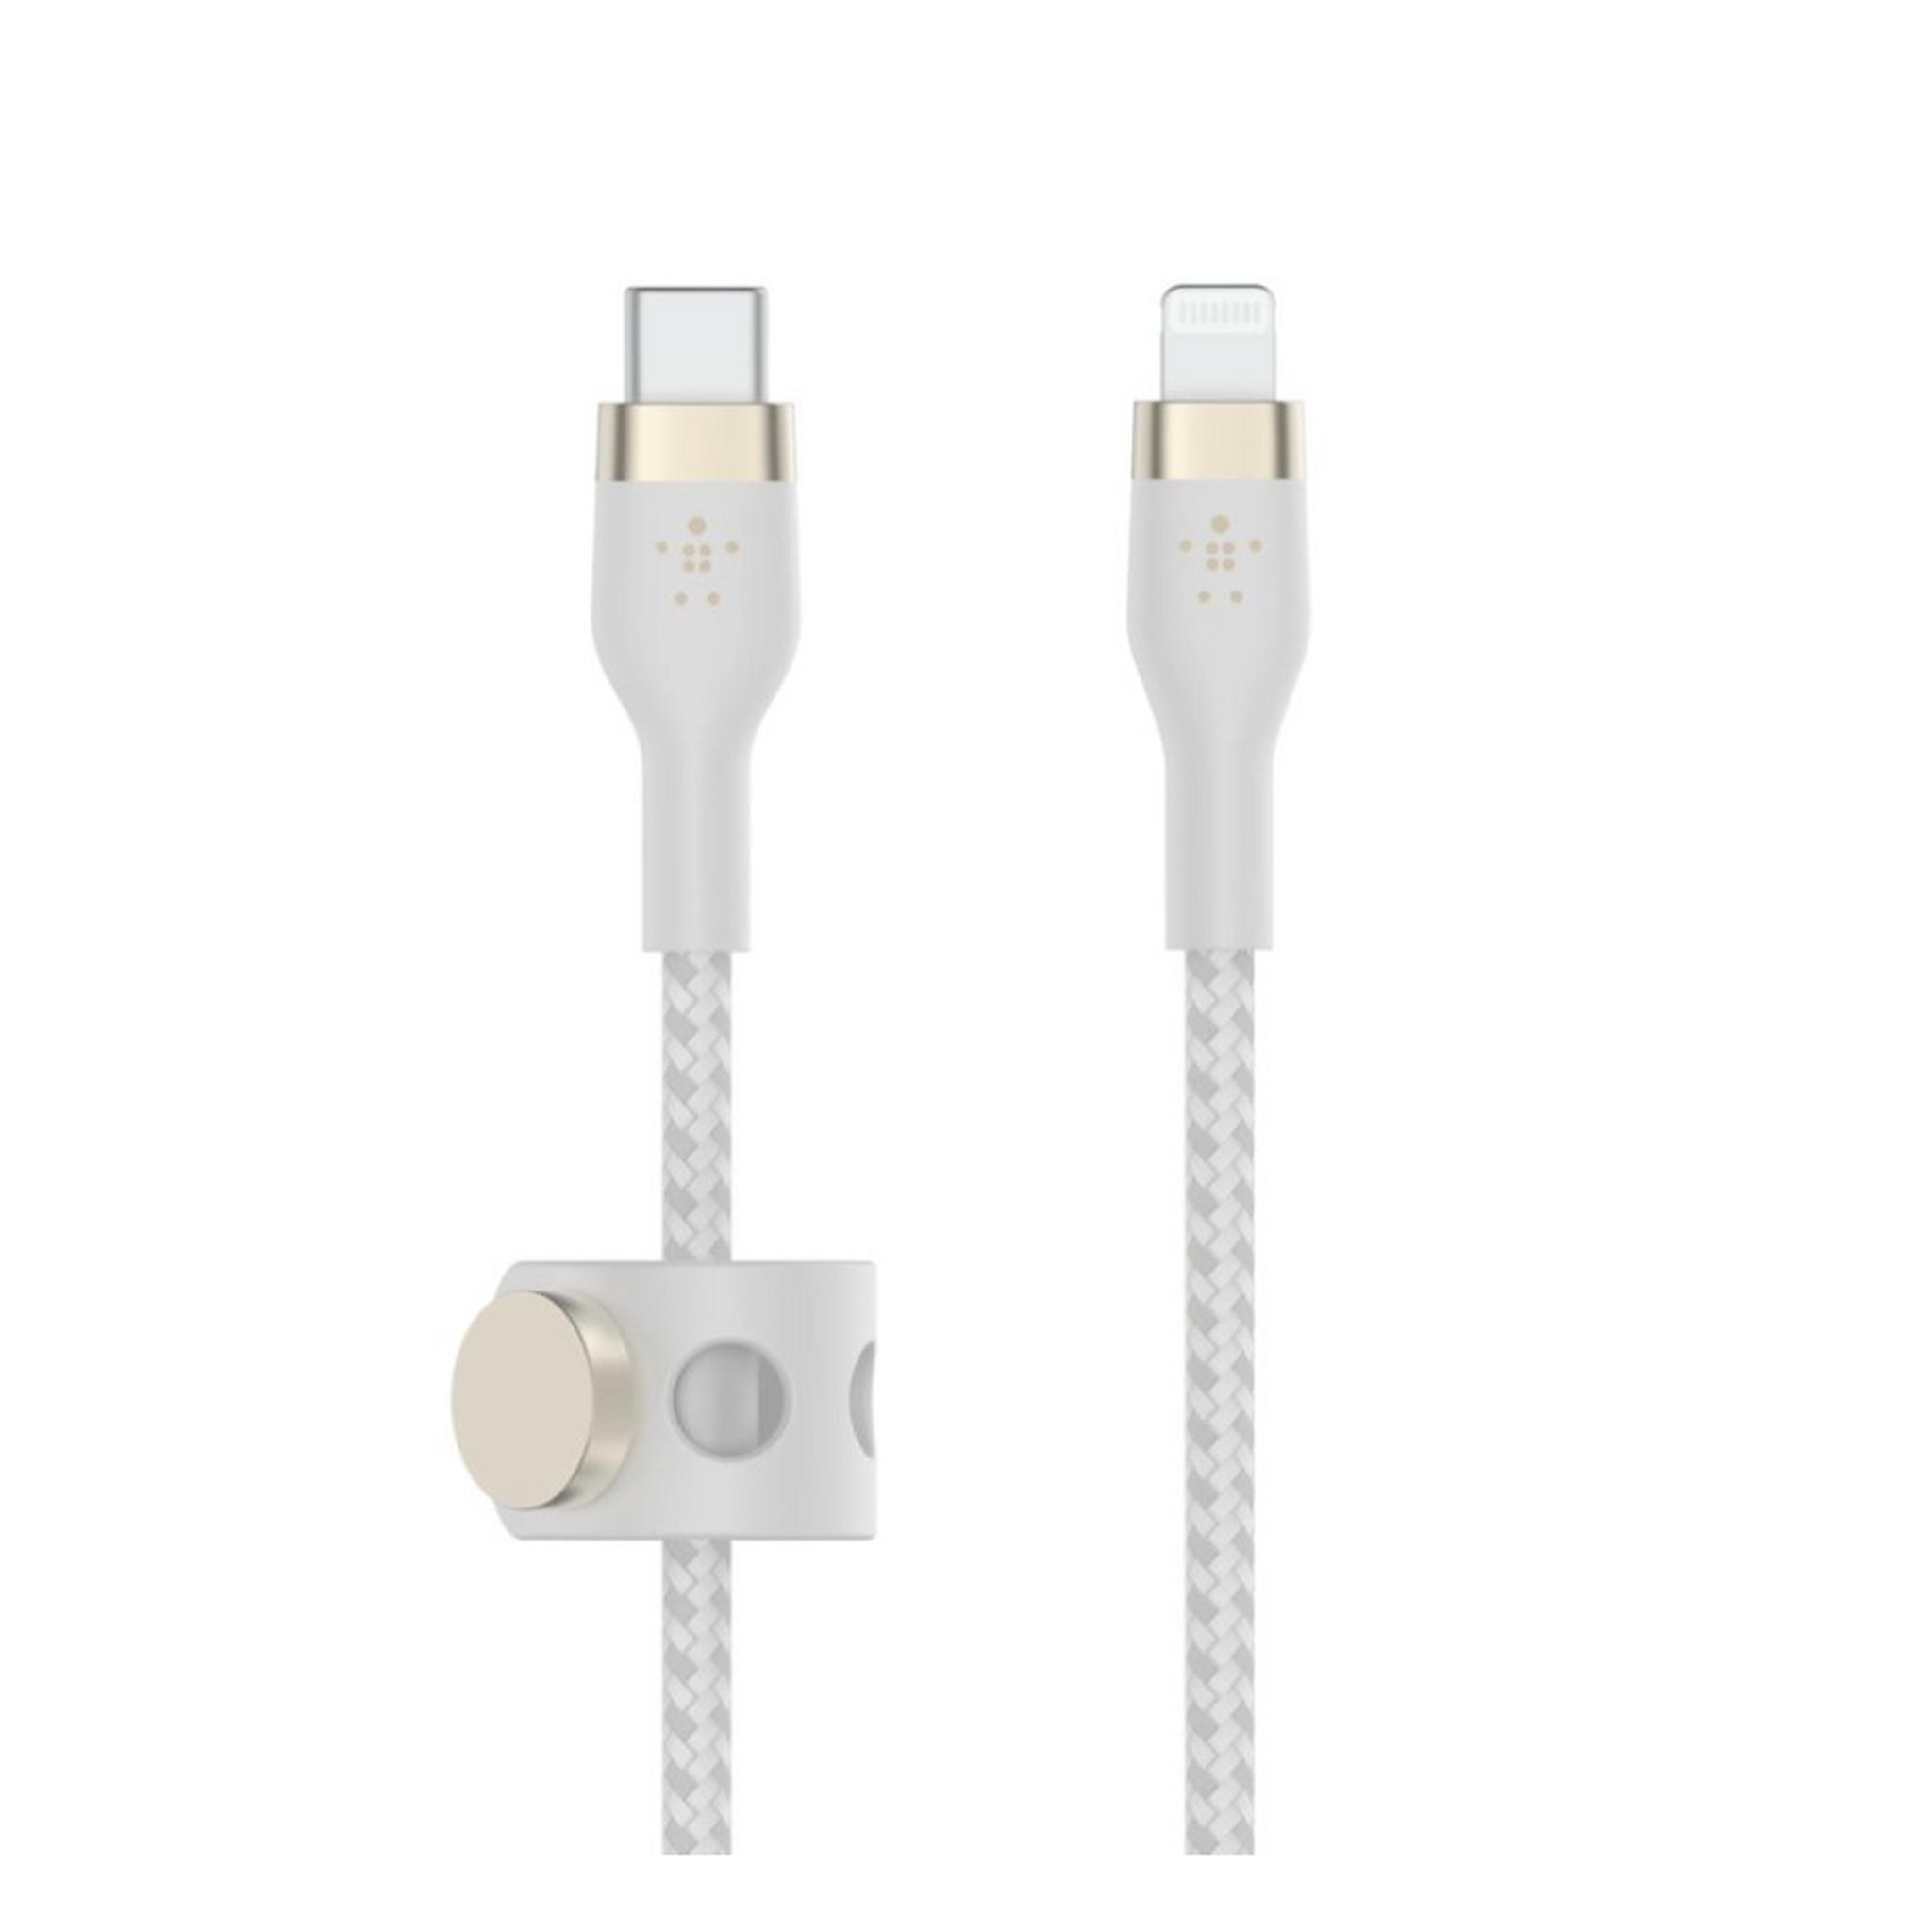 Belkin USB-C to Lightning Cable 1M - White